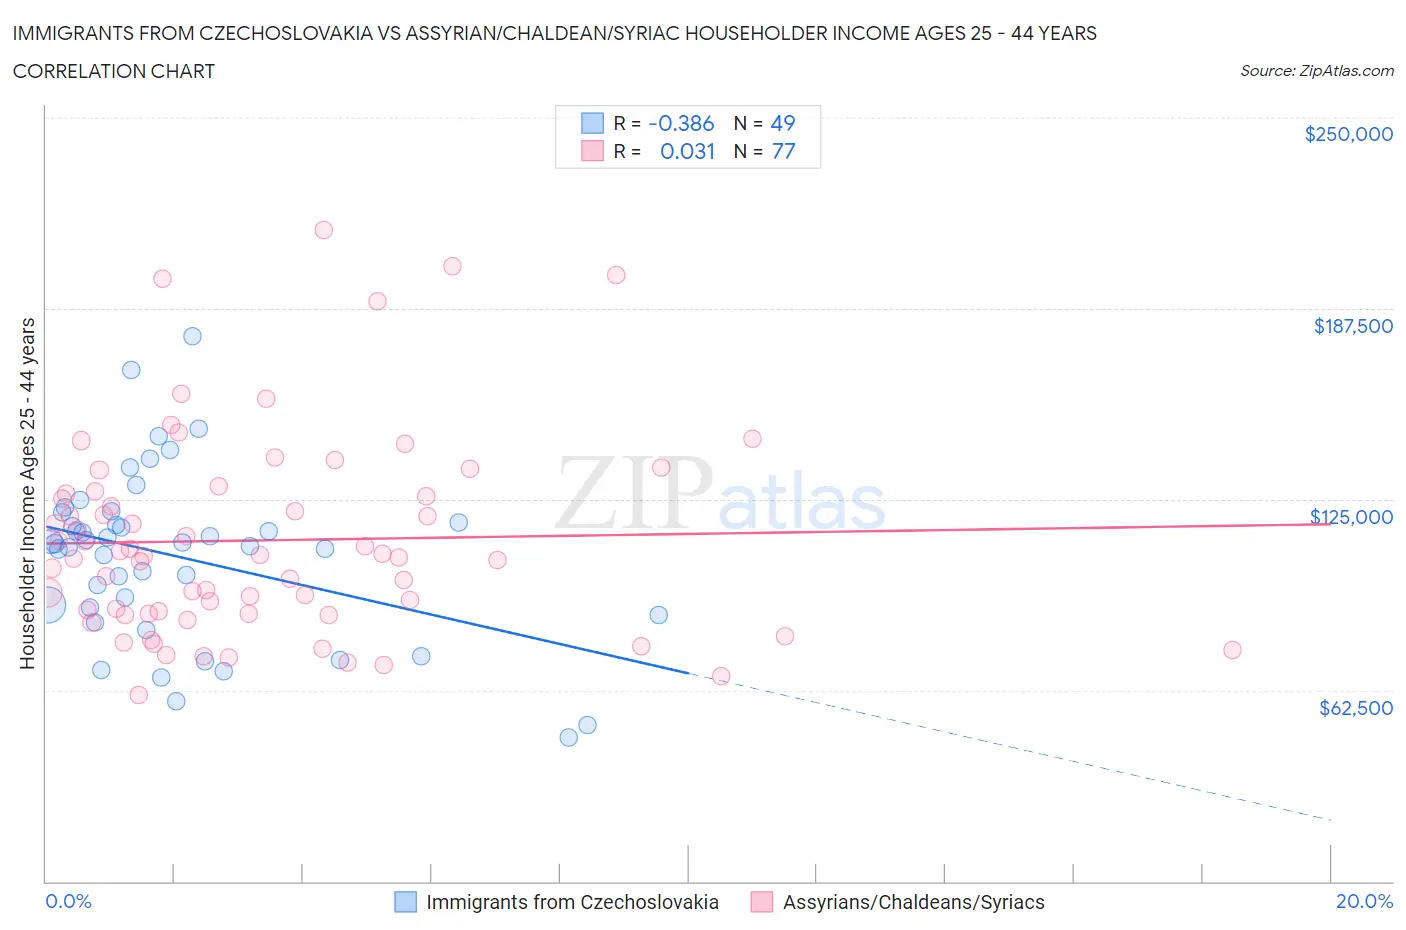 Immigrants from Czechoslovakia vs Assyrian/Chaldean/Syriac Householder Income Ages 25 - 44 years